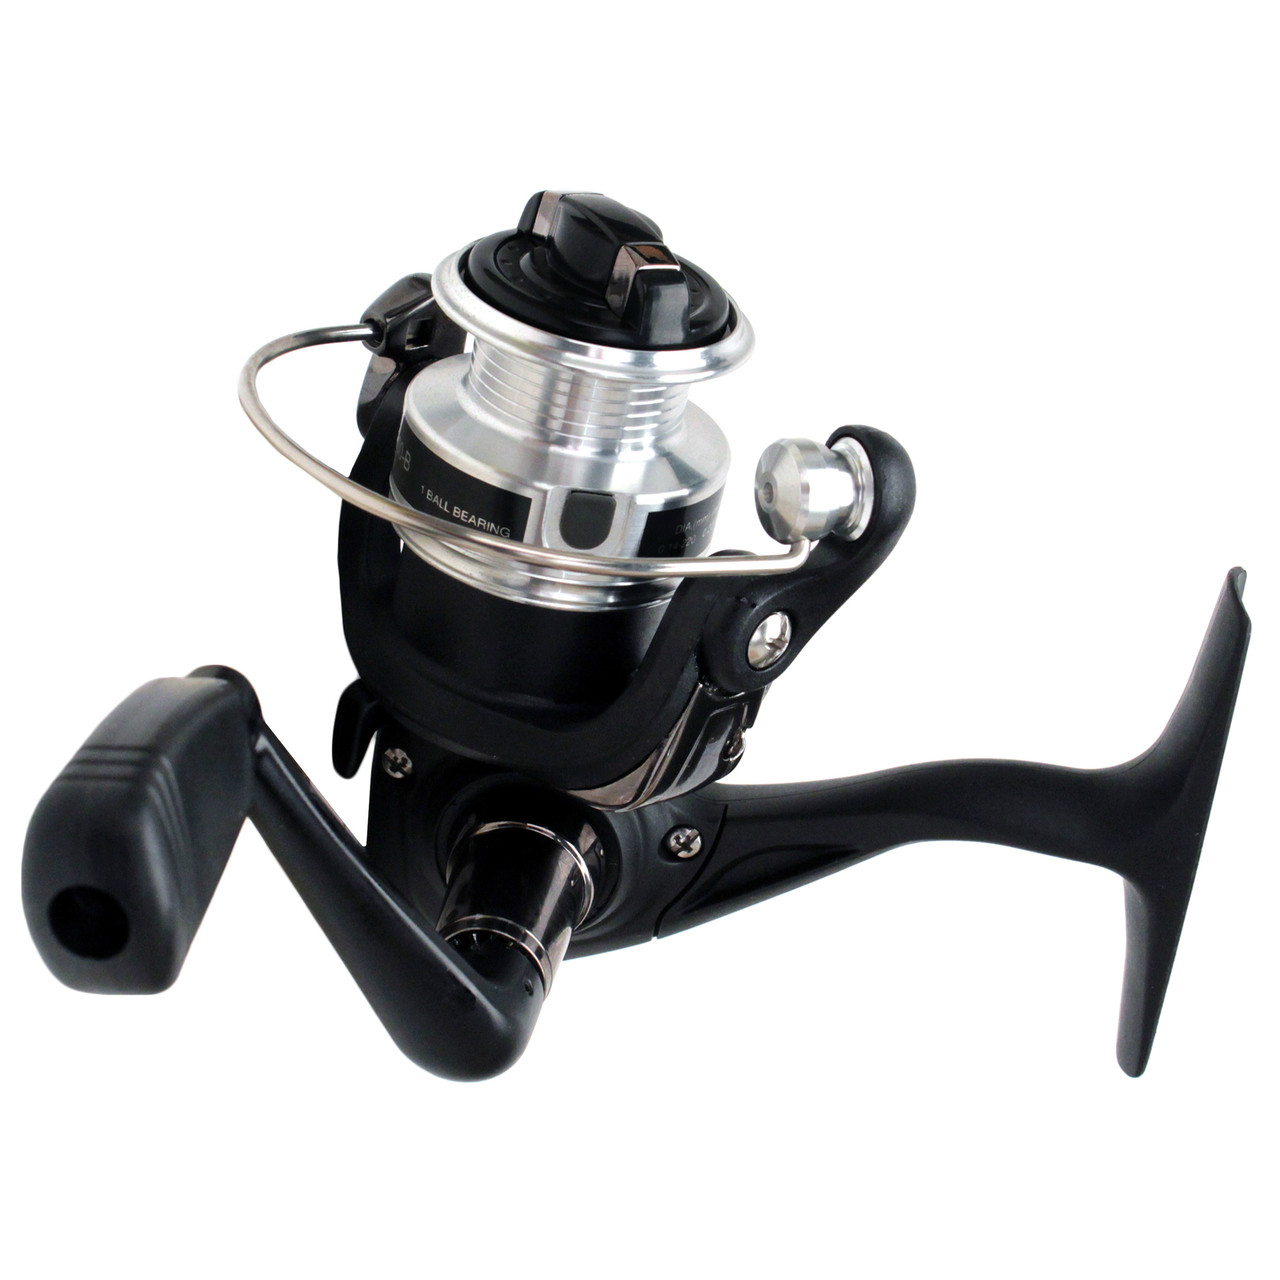 https://cdn10.bigcommerce.com/s-hudw0p8/products/35843/images/3523/d-spin500-b-daiwa-d-spin-super-ultralight-freshwater-spinning-reel-2__81794.1508200284.1280.1280.jpg?c=2